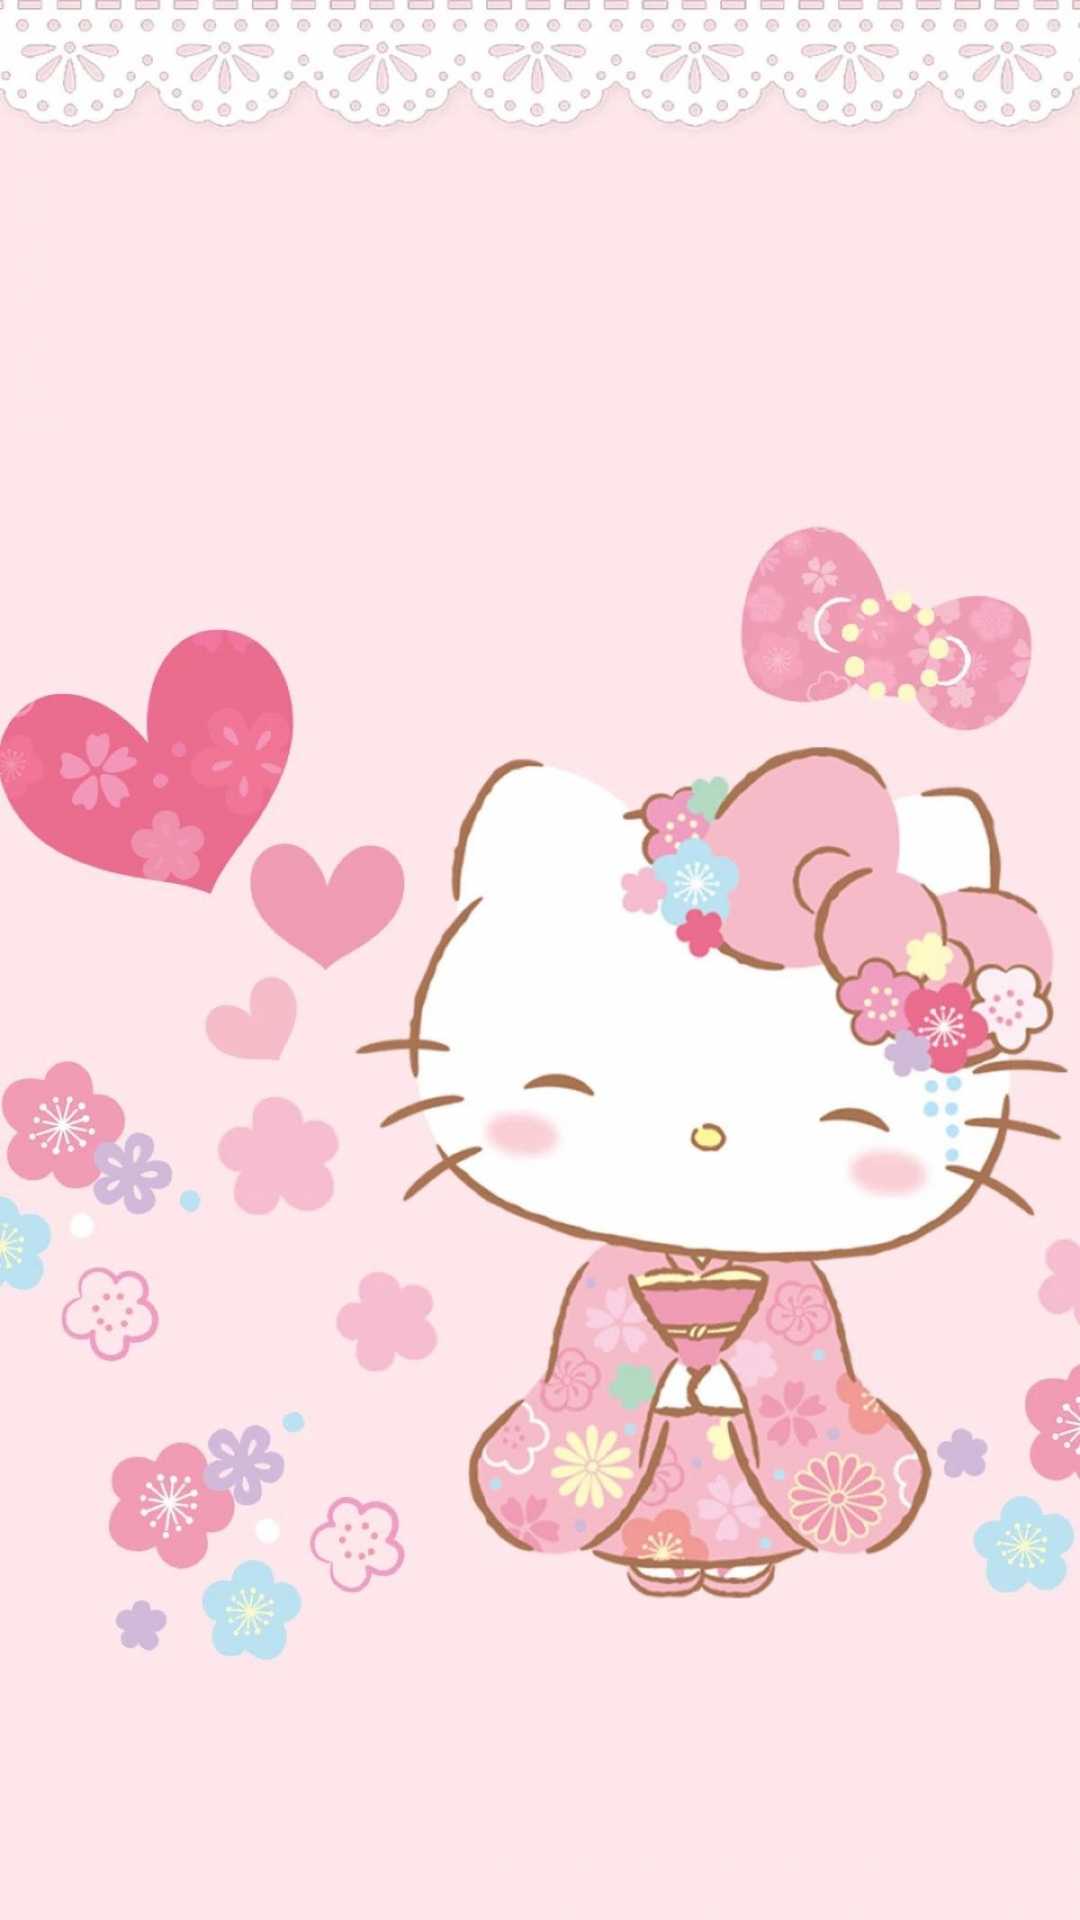 Hello Kitty iPhone Wallpaper with high-resolution 1080x1920 pixel. You can use this wallpaper for your iPhone 5, 6, 7, 8, X, XS, XR backgrounds, Mobile Screensaver, or iPad Lock Screen - Sanrio, Hello Kitty